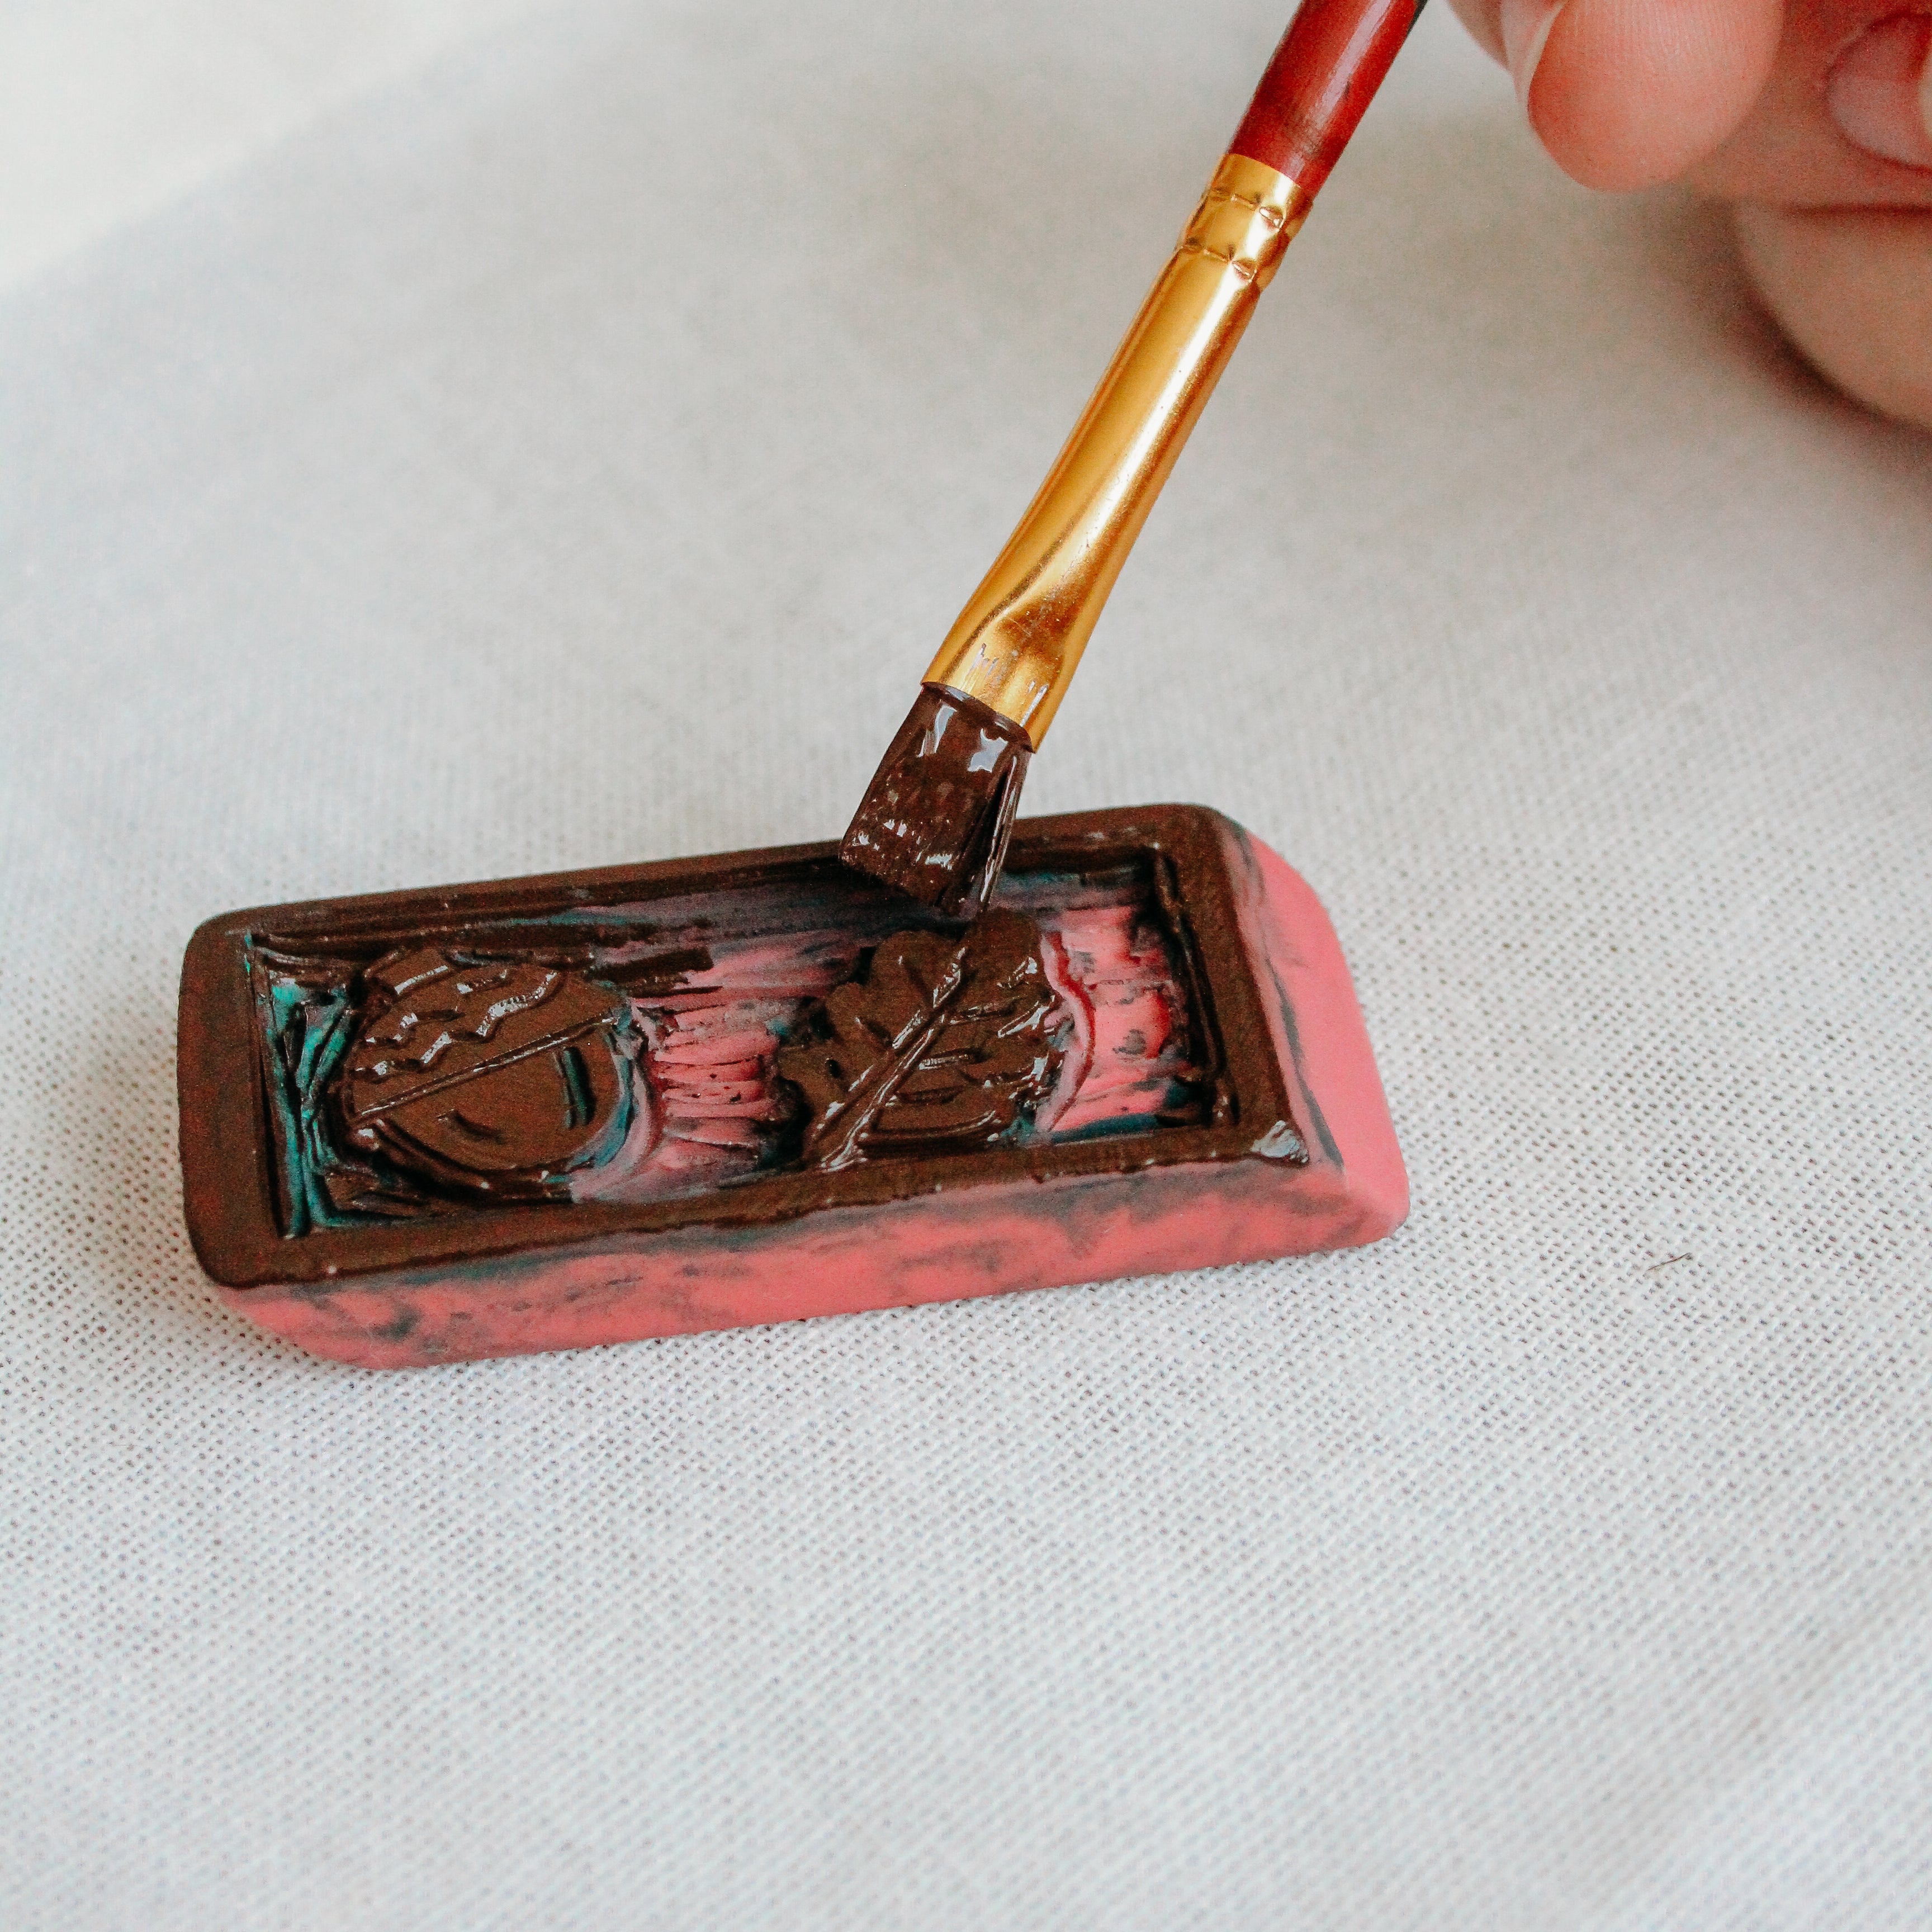 A paintbrush is painting a carved eraser.